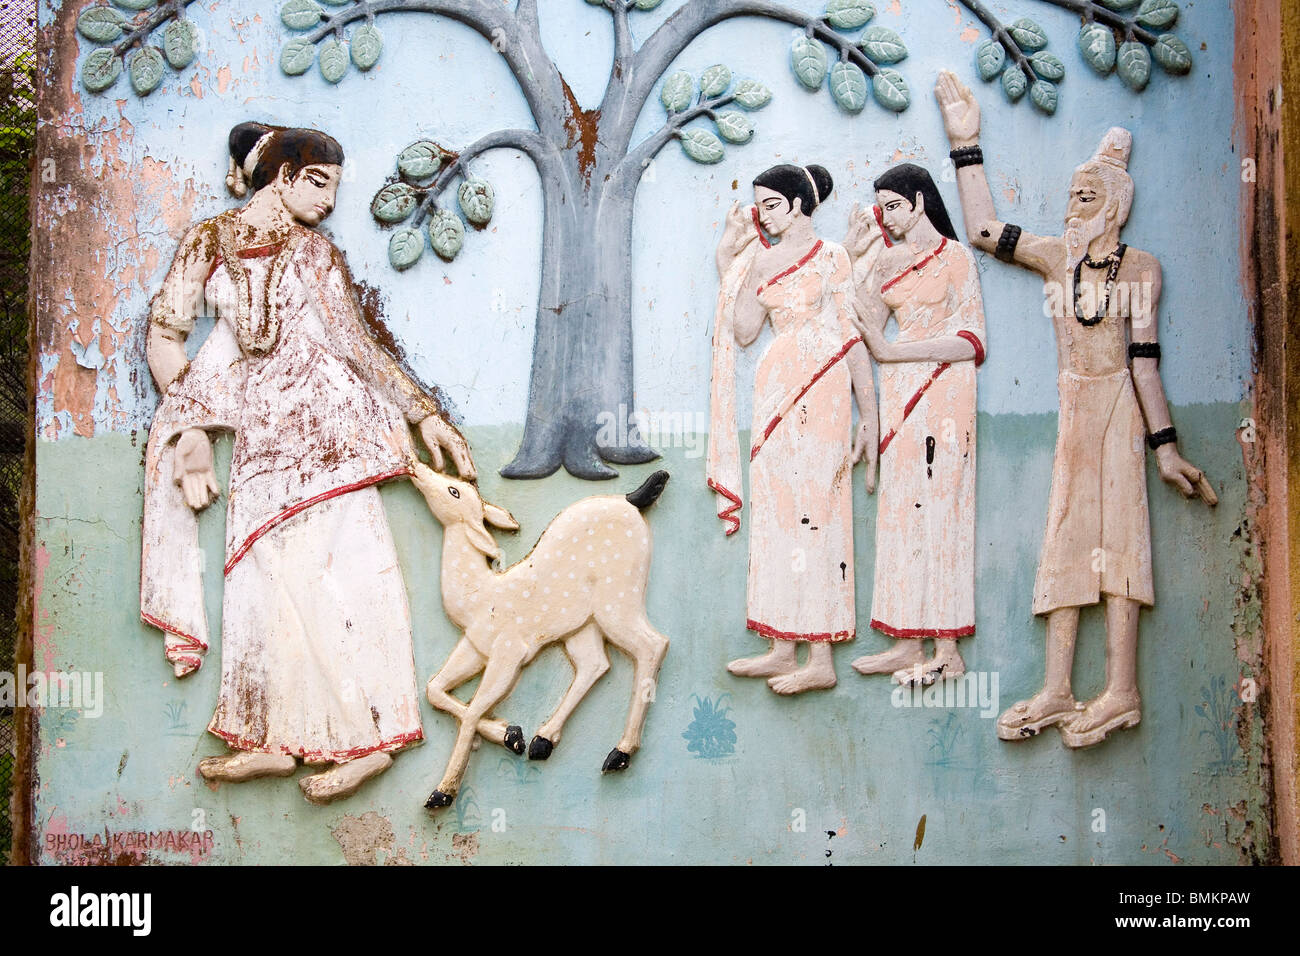 Scene from Kalidas Sanskrit epic play Abhigyan Shakuntalam carved on wall in zoo ; Calcutta now Kolkata ; West Bengal ; India Stock Photo